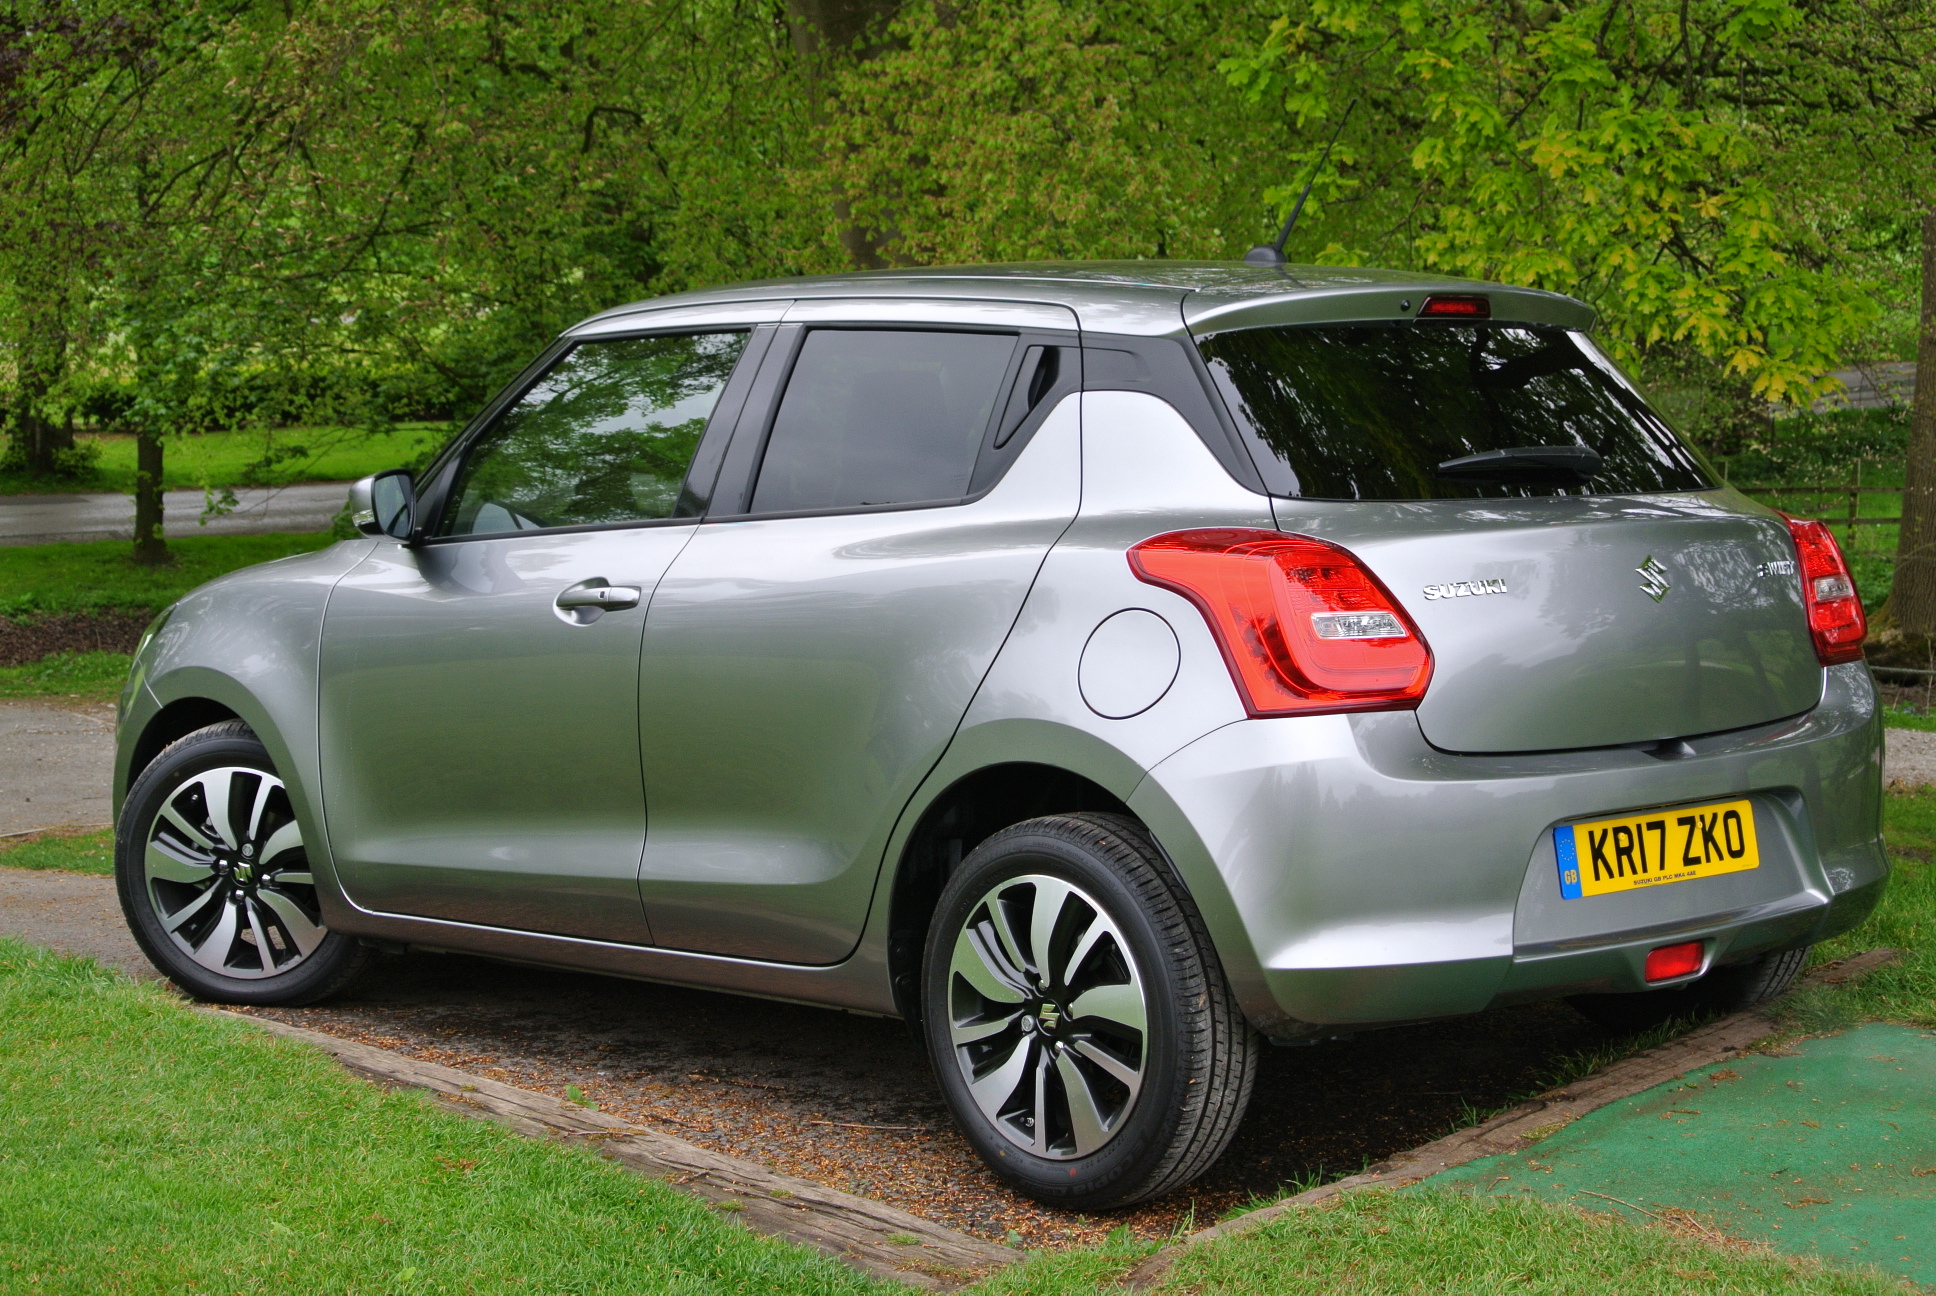 Suzuki’s Swift by name and nature is declared ‘ultimate compact hatch’